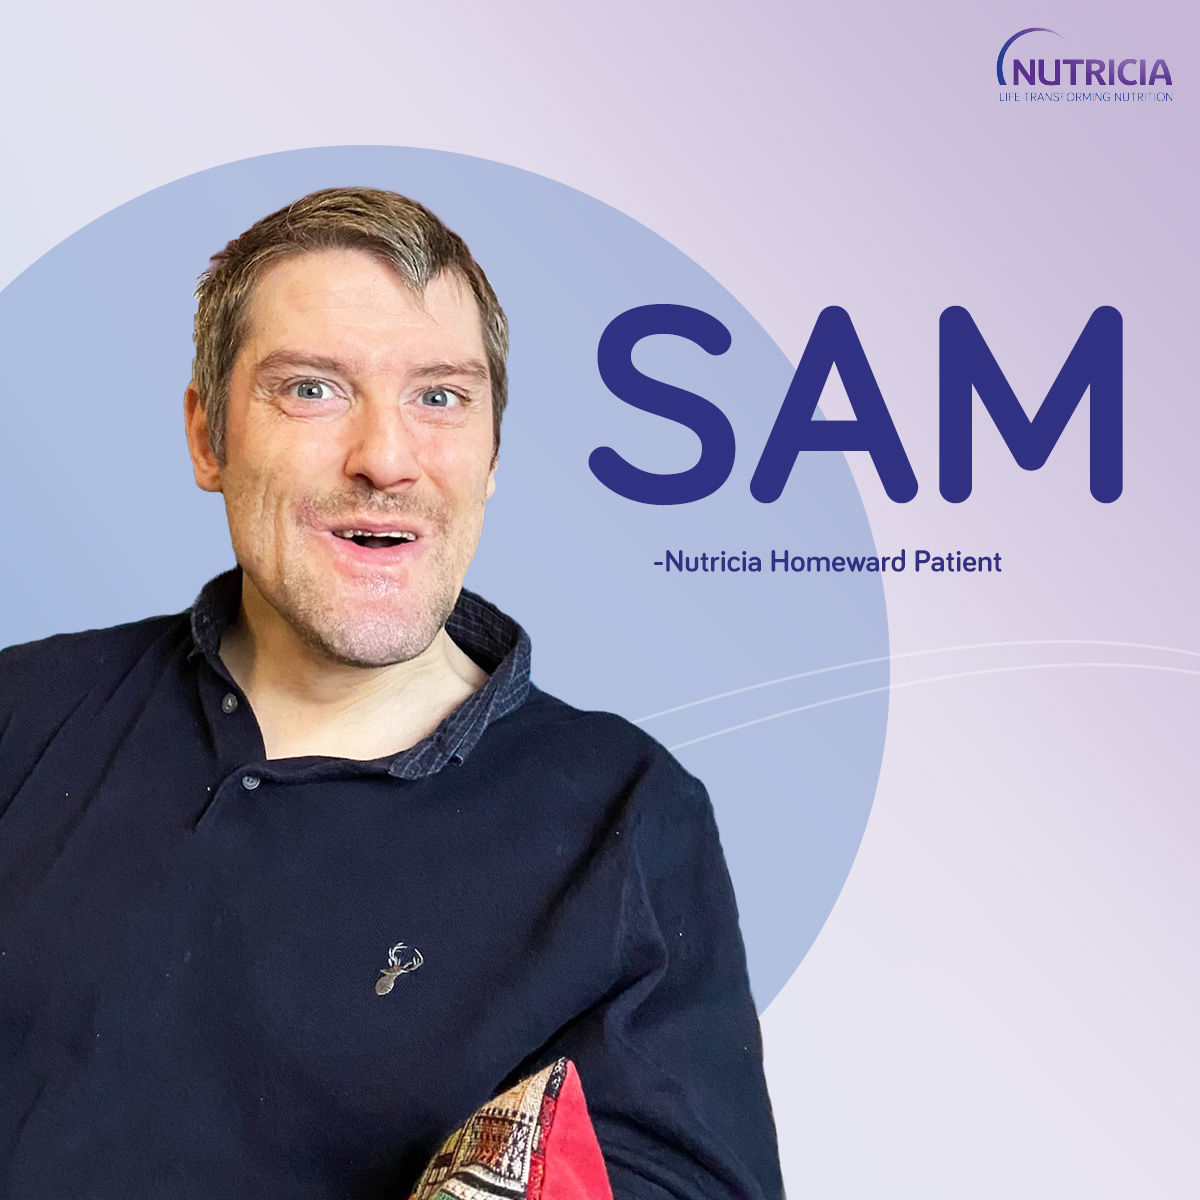 Sam is a Nutricia Homeward patient